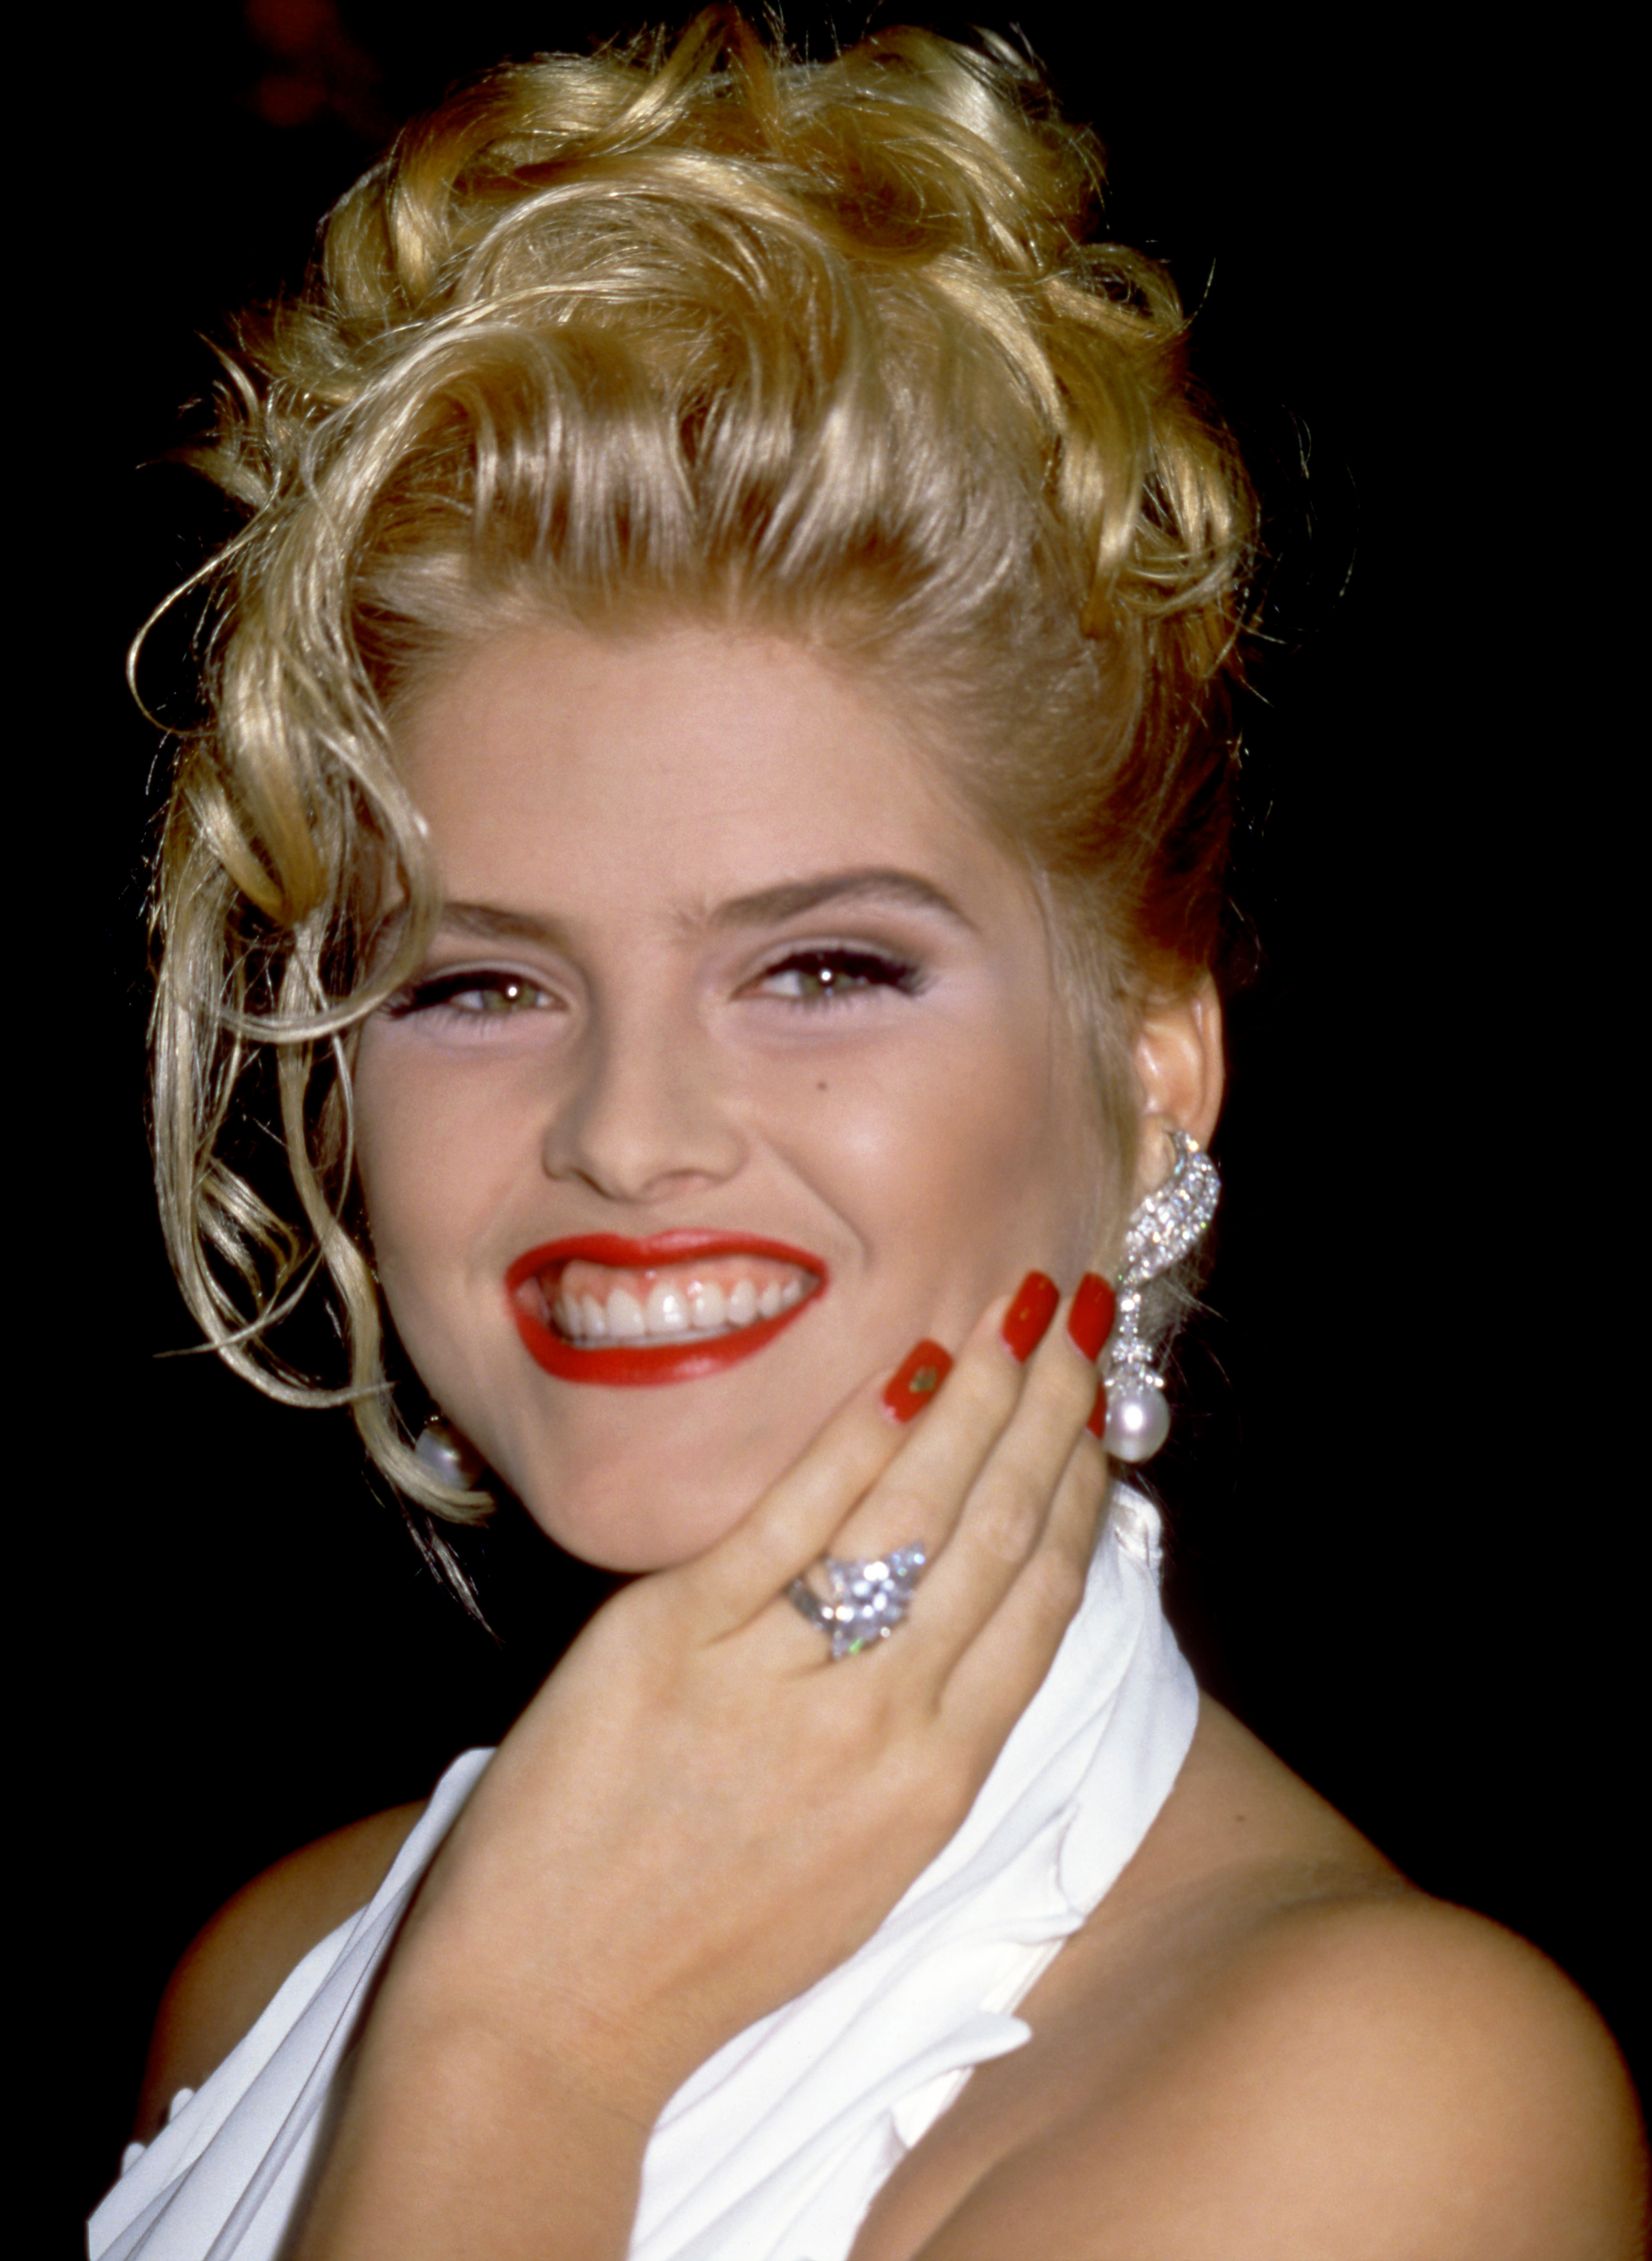 Anna Nicole Smith attends the 1994 Video Software Dealers Association (VSDA) convention on July 26, 1994 in Las Vegas, Nevada | Source: Getty Images